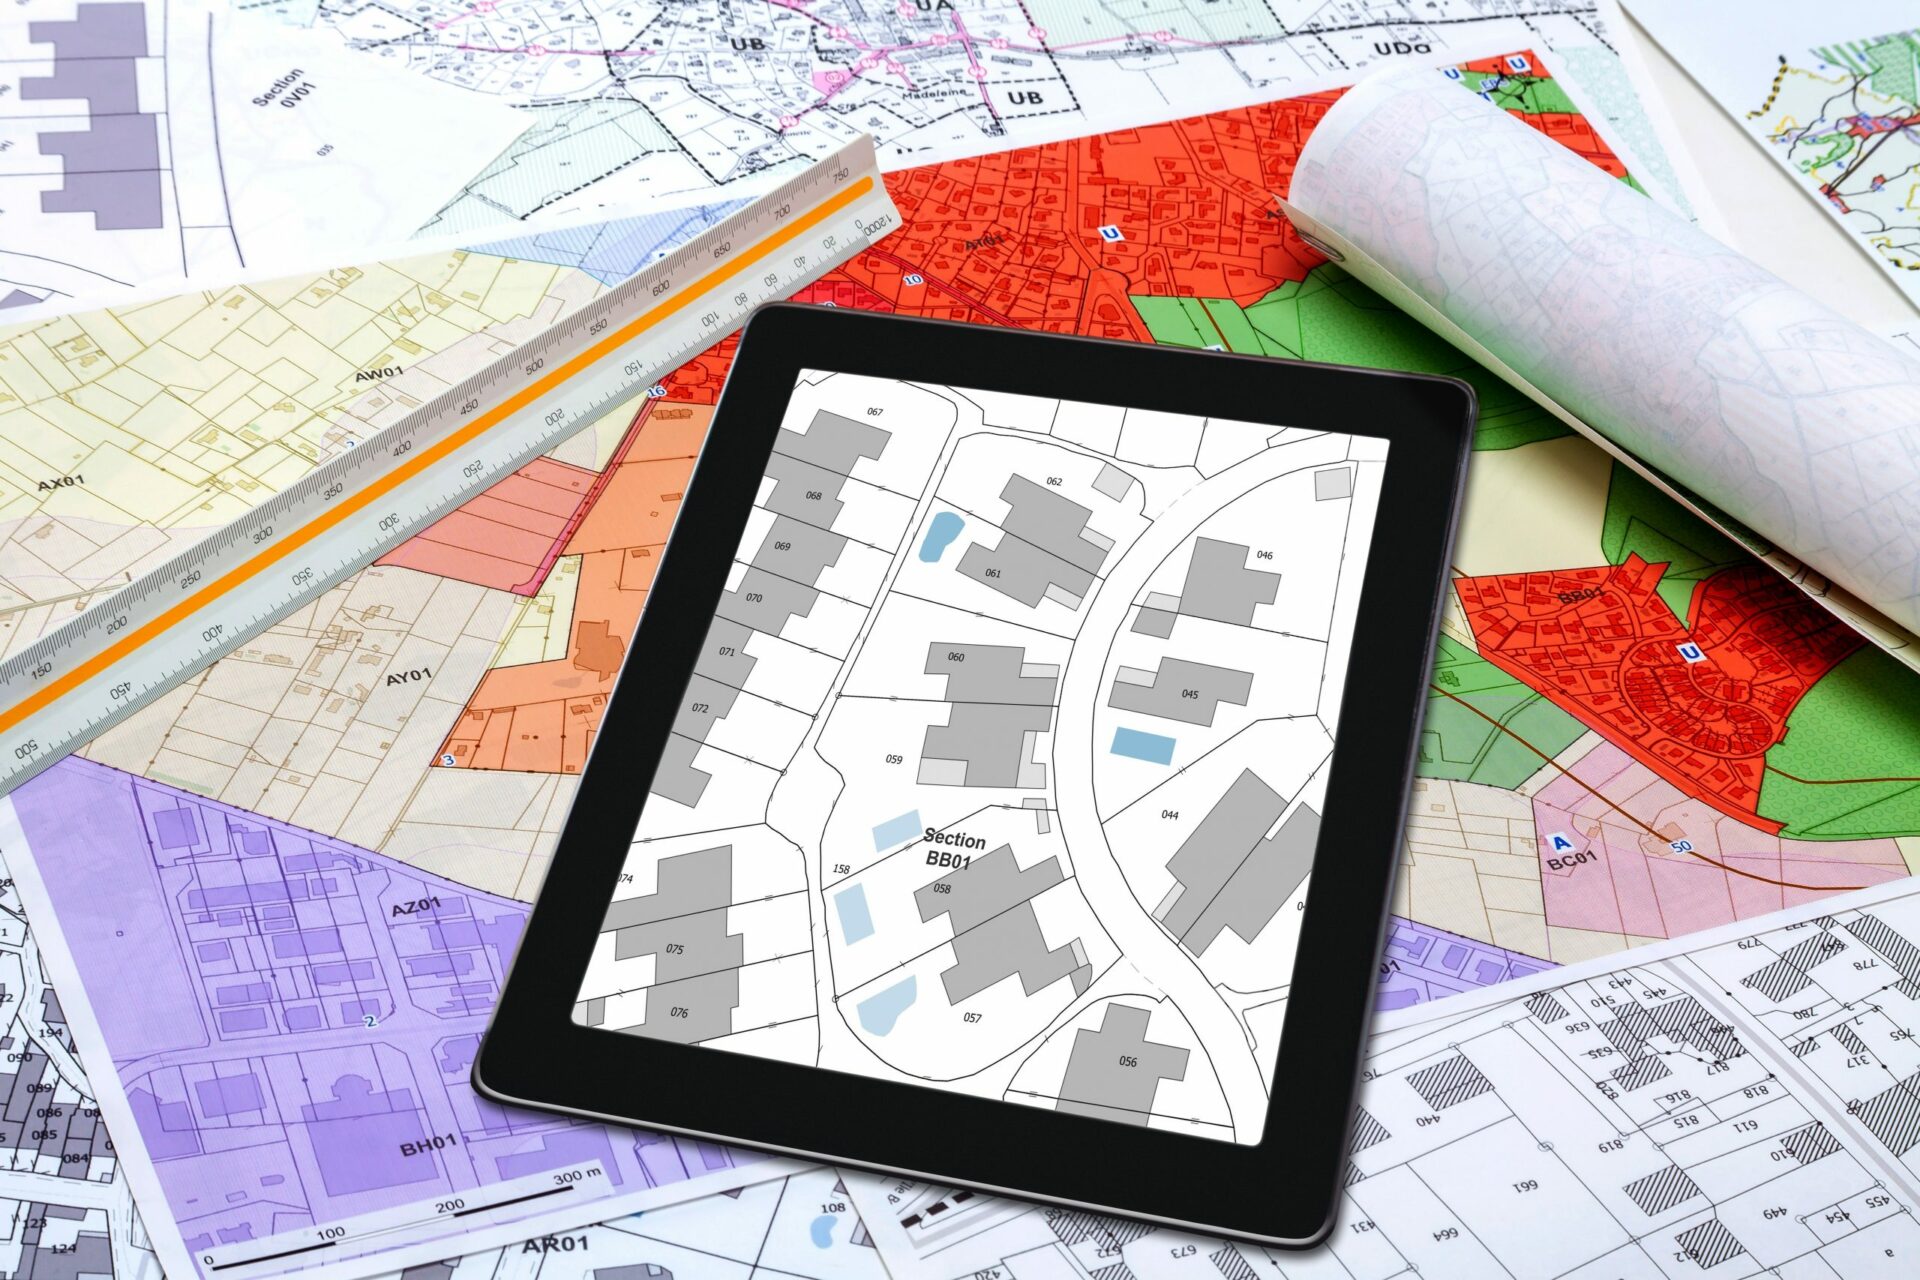 iPad with planning map, atop other physical planning maps that highlight legal boundaries